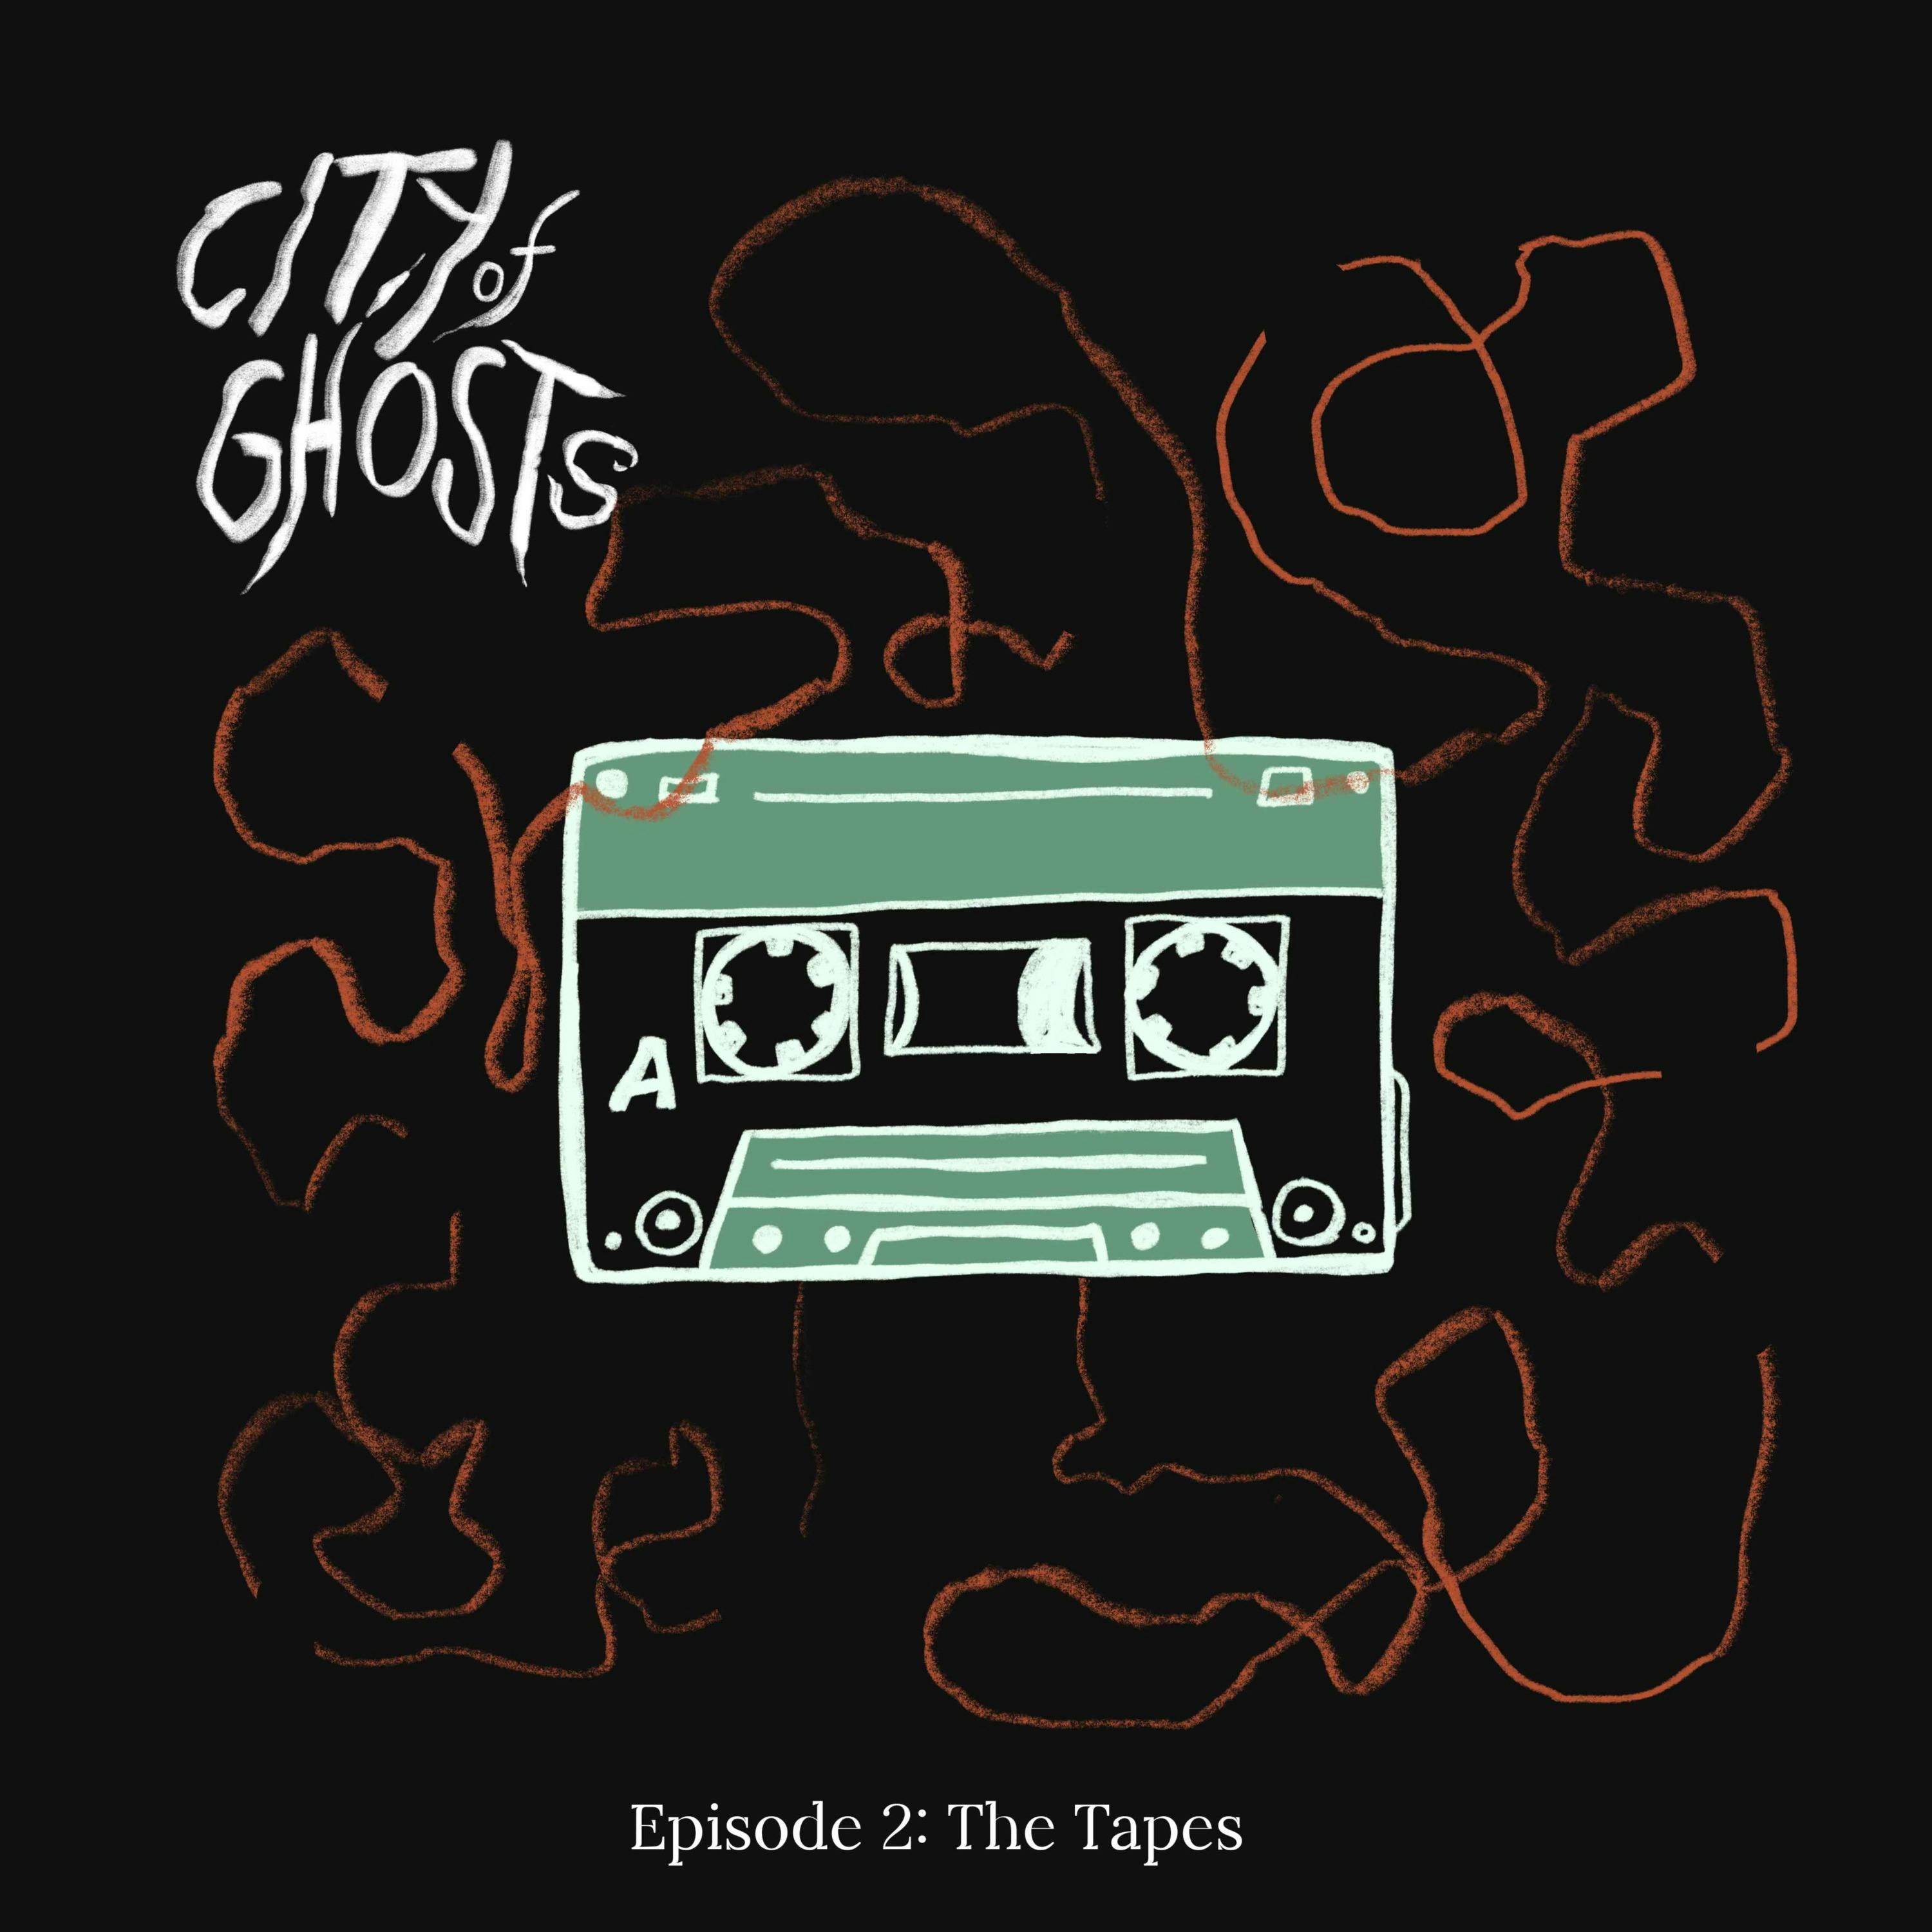 Episode 2: The Tapes